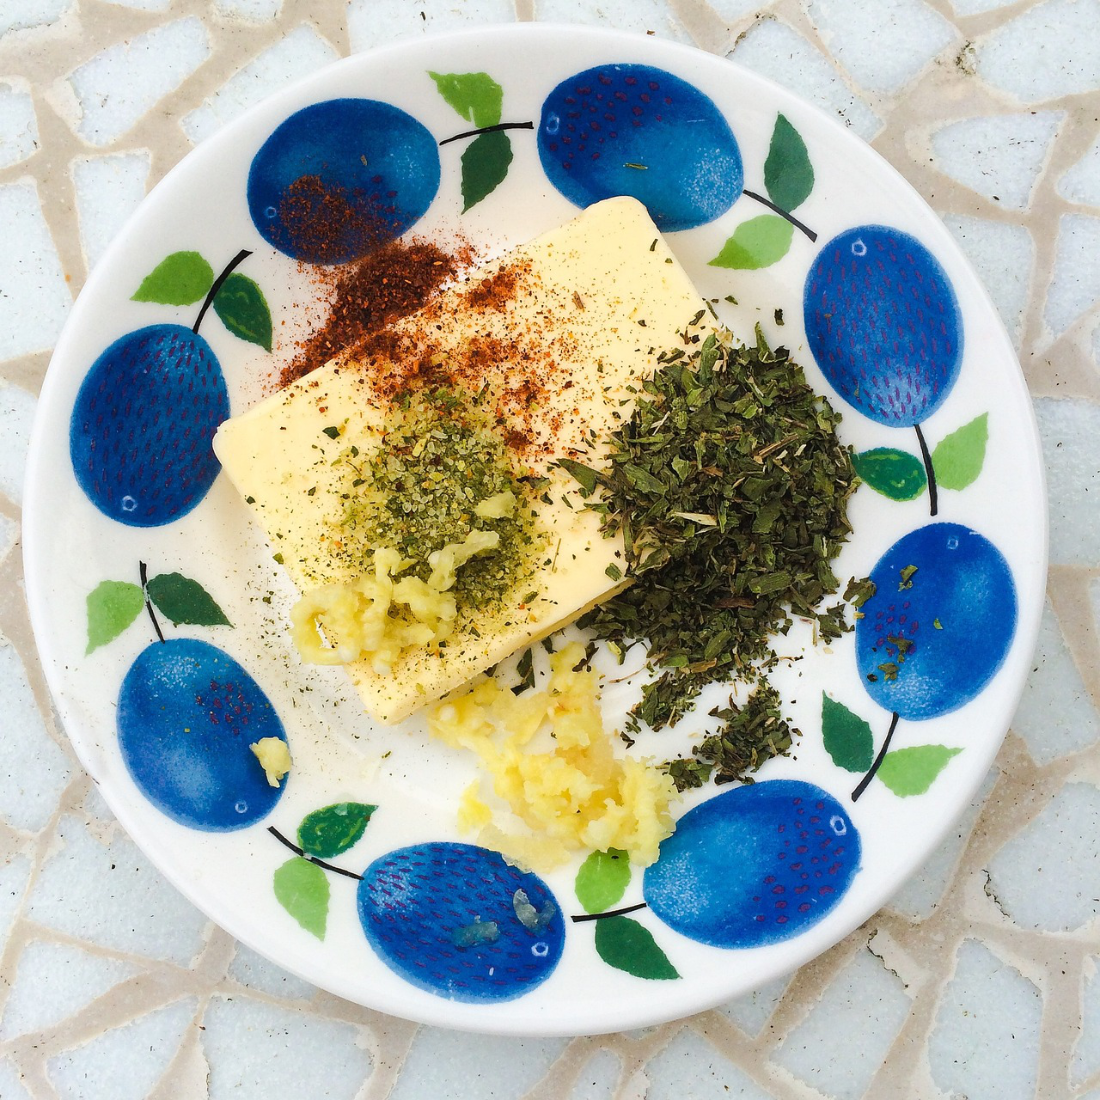 A Genmaicha compound butter is delicious and super easy to make.